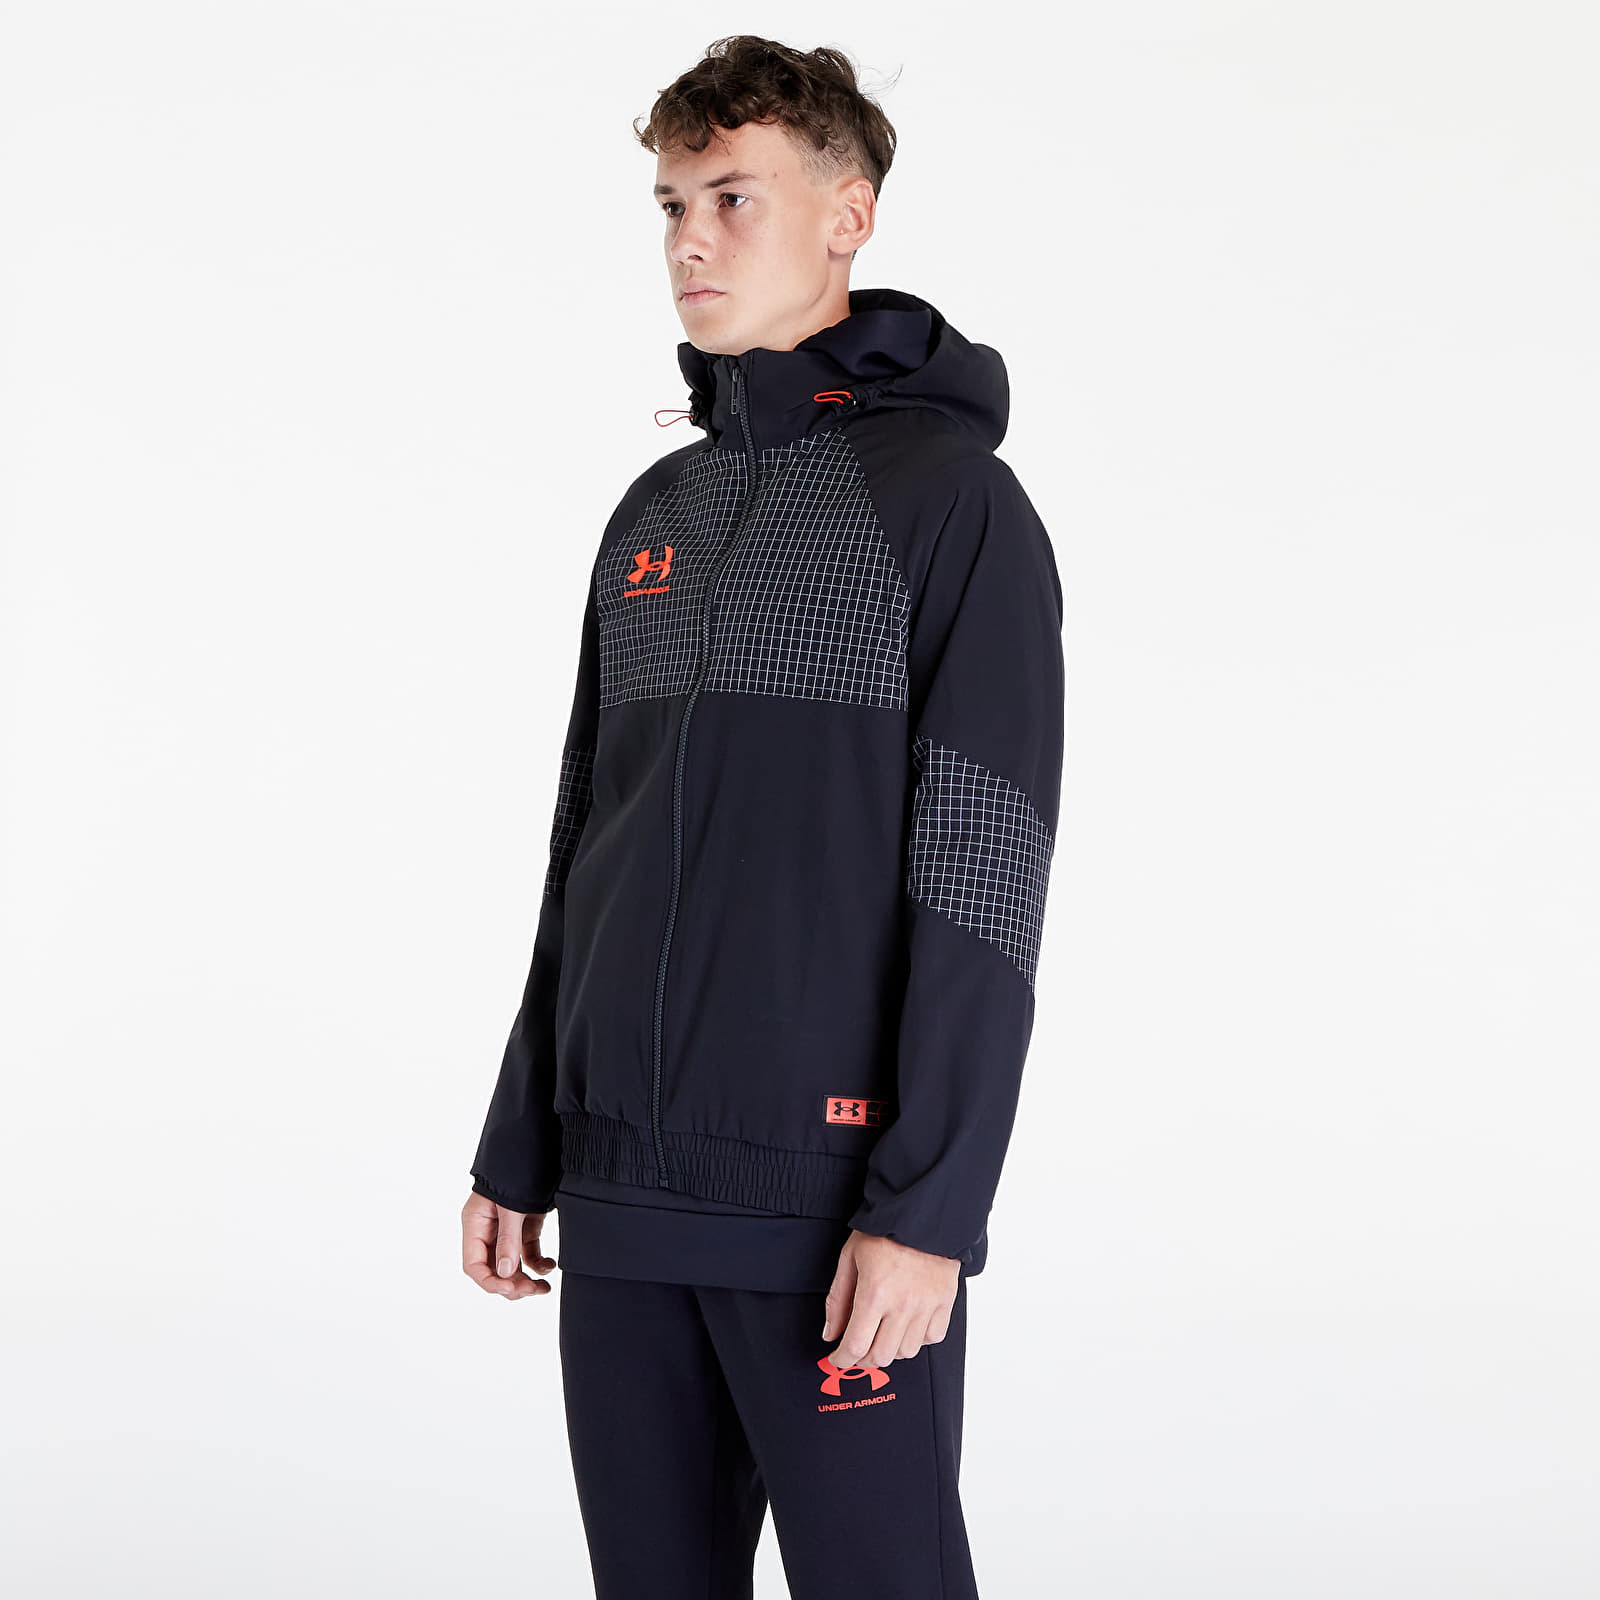 Under Armour - accelerate track jacket black